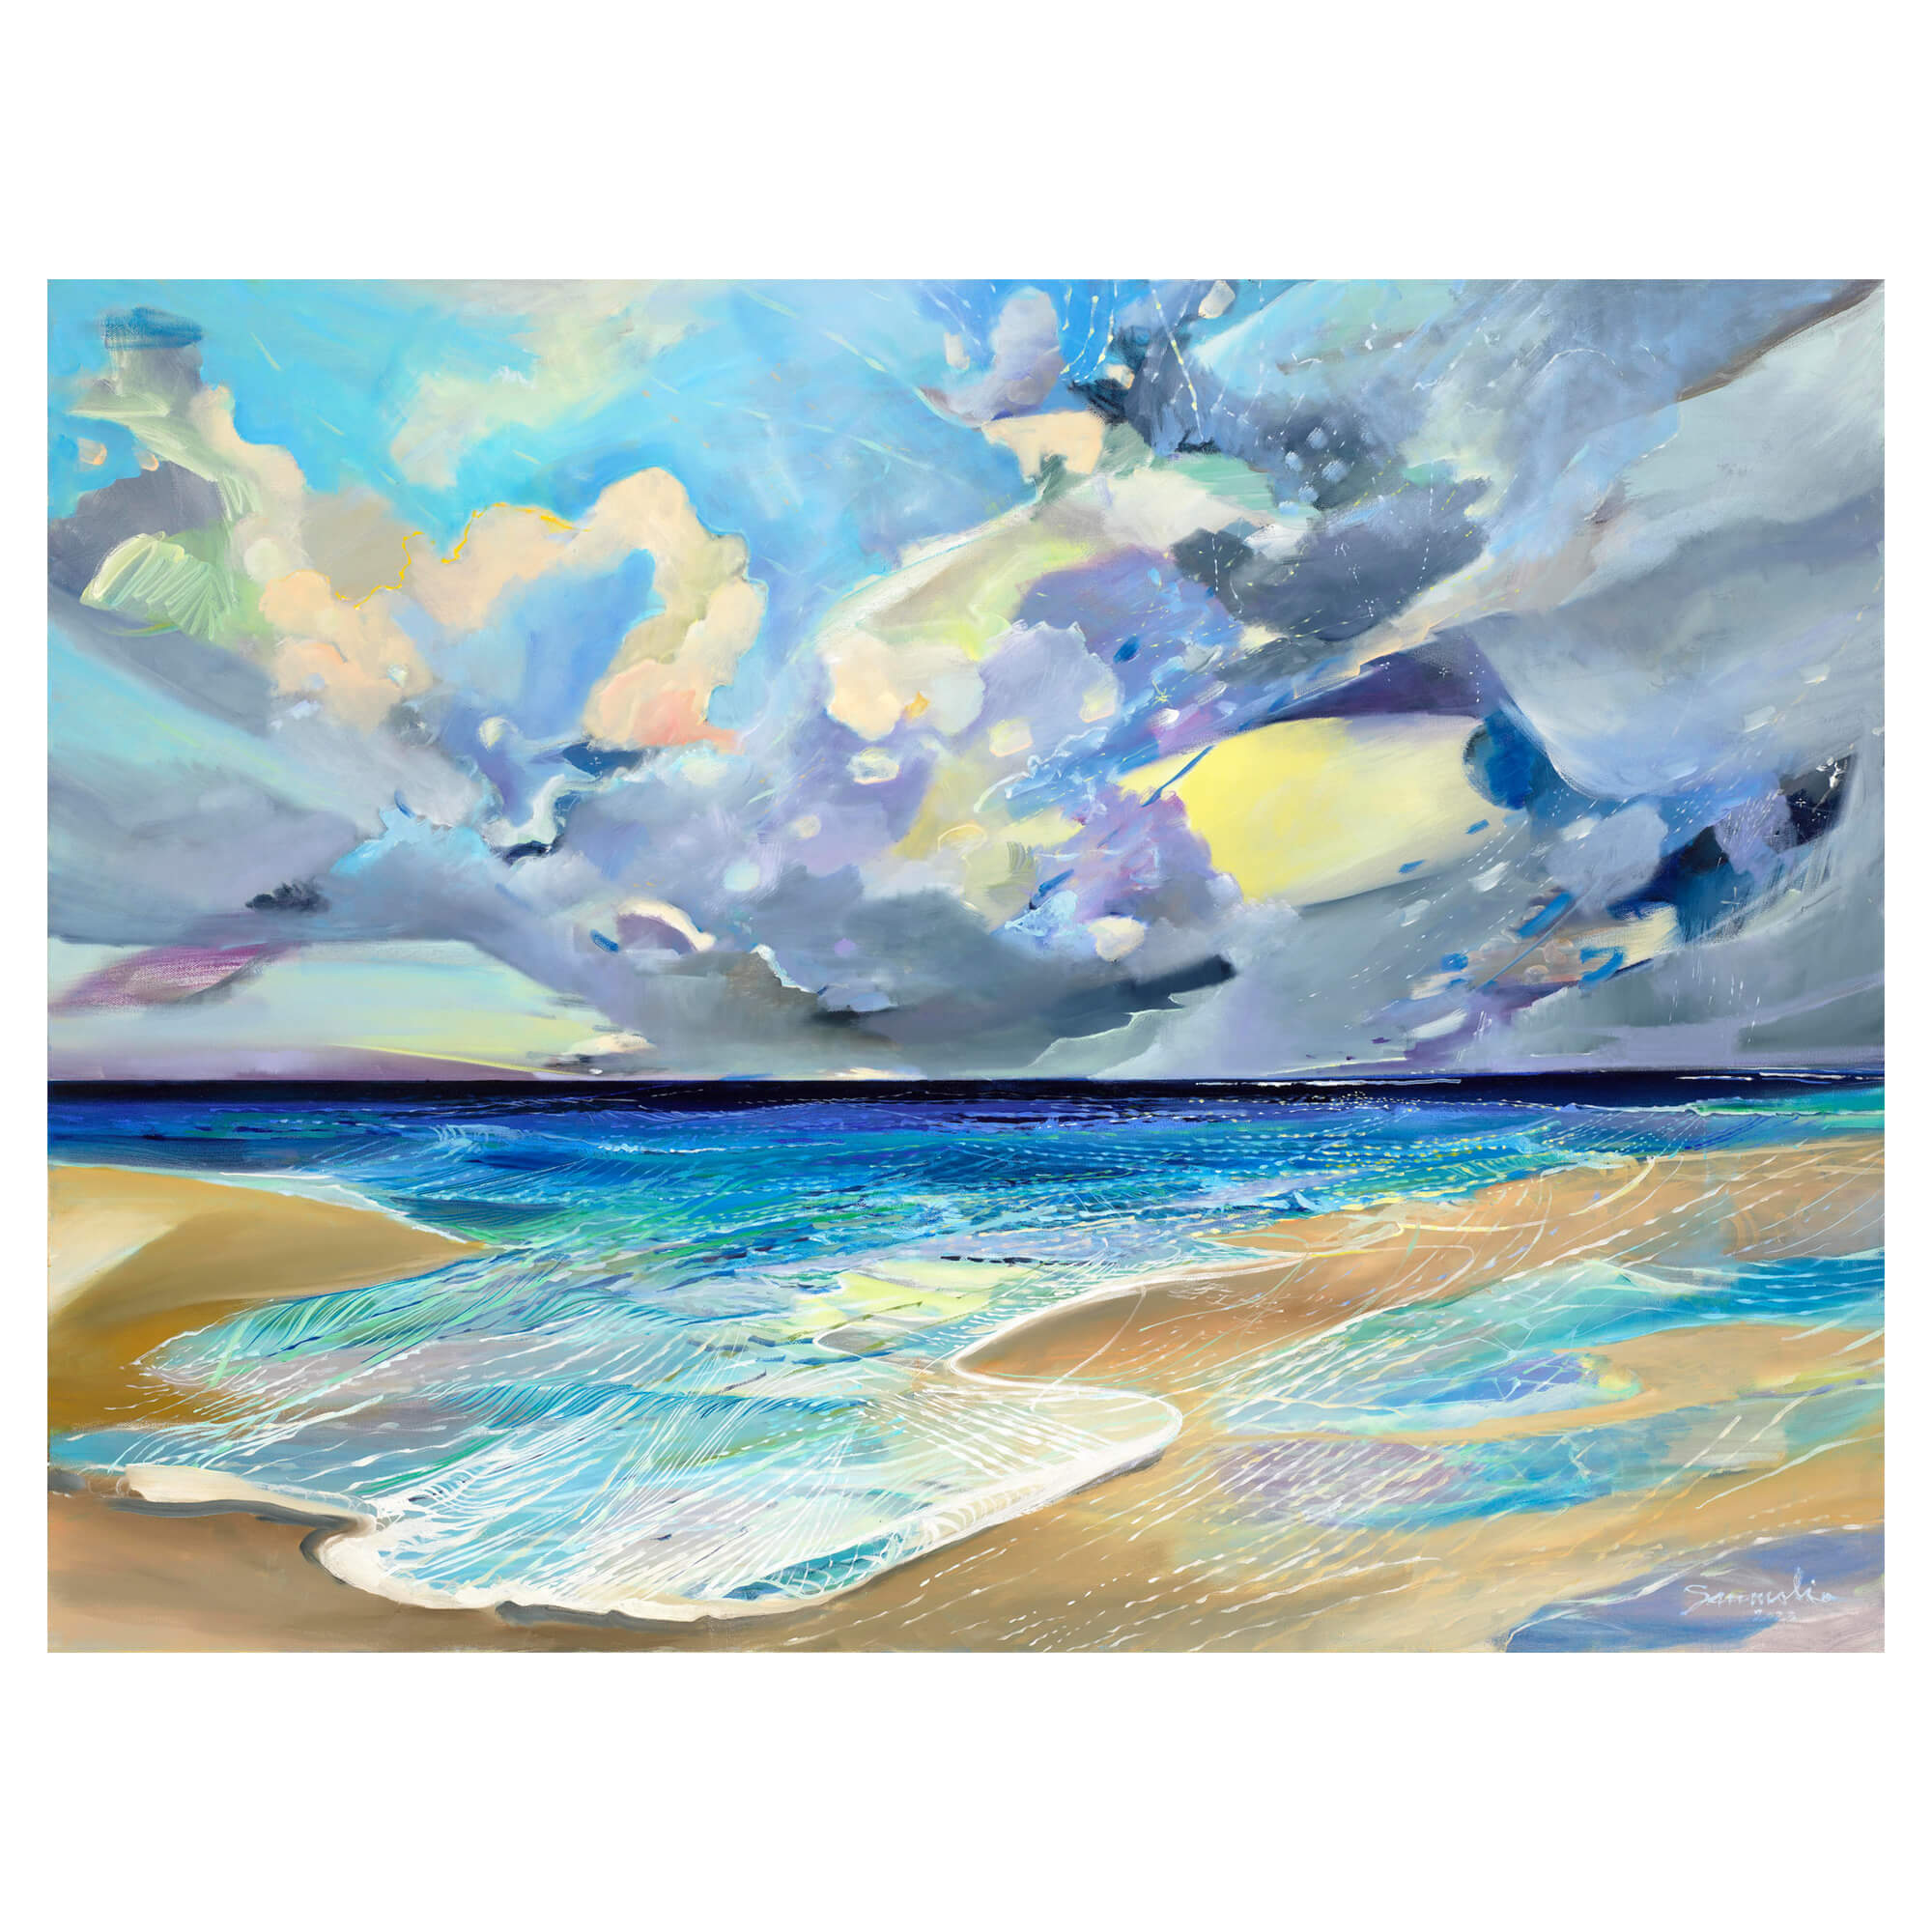 Colorful clouds and teal ocean water by Hawaii artist Saumolia Puapuaga